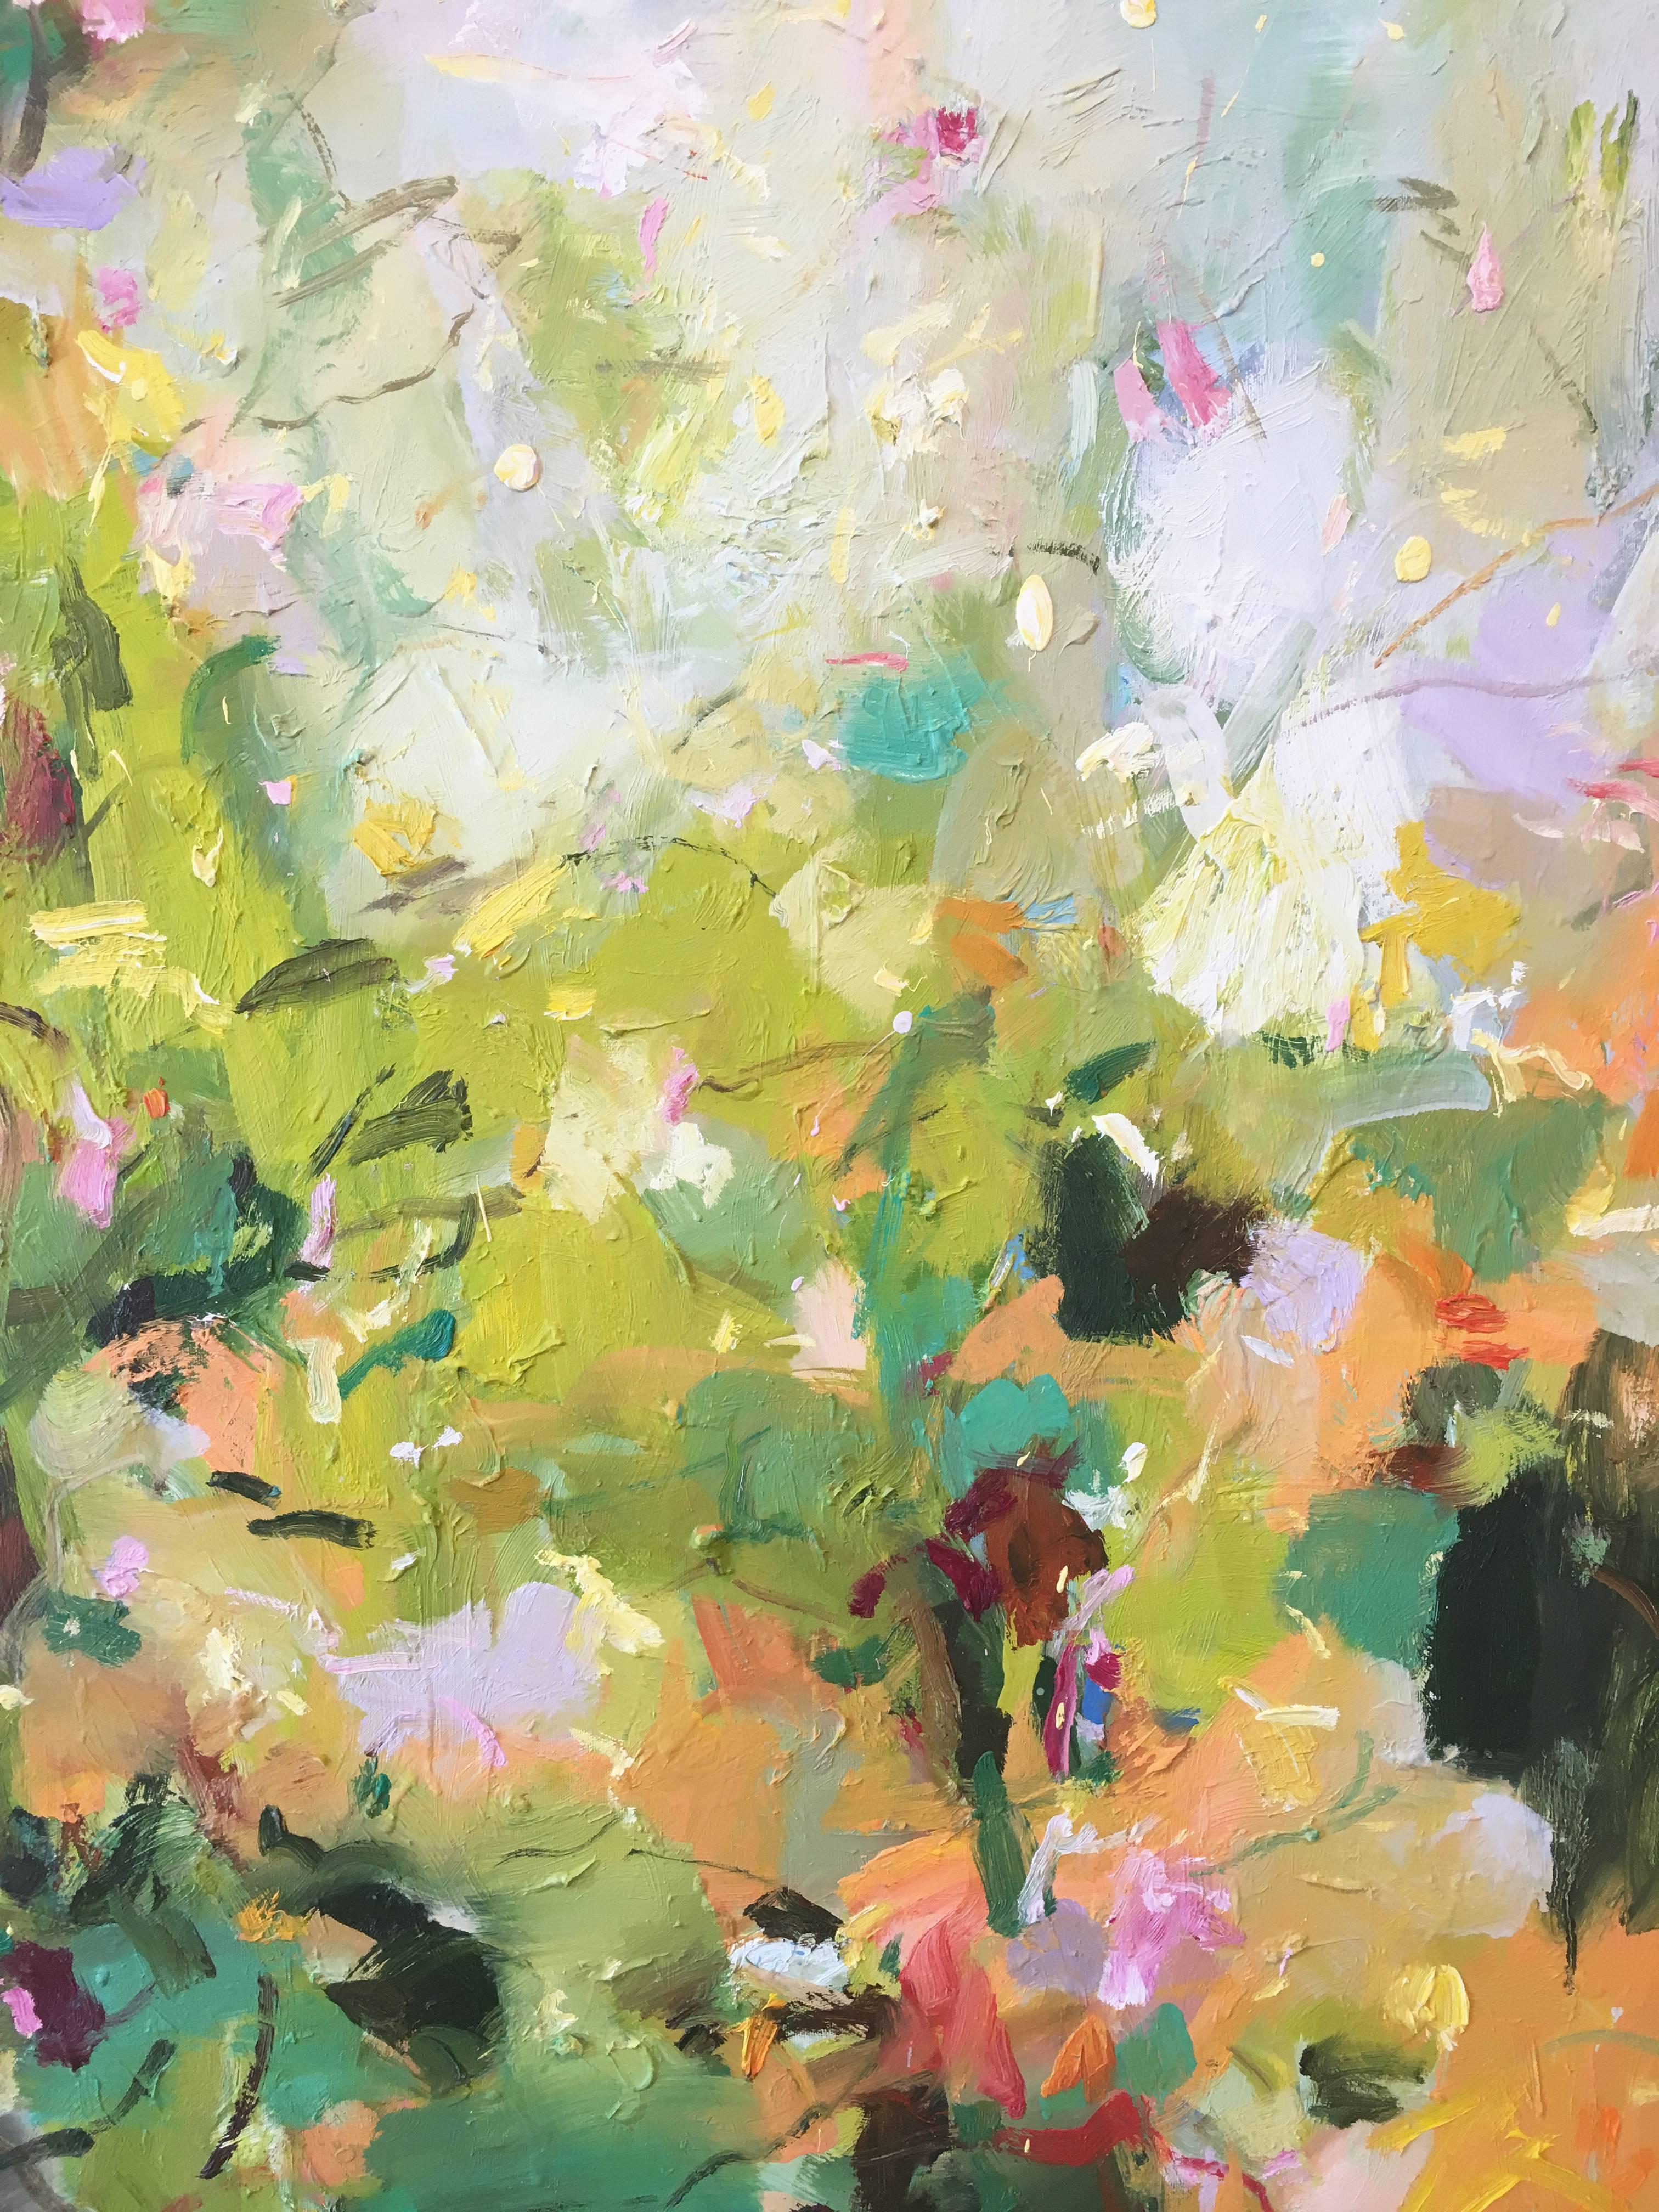 Autumn Woods by Chinese/Canadian painter, Yangyang Pan, 2016-2017. Oil on canvas, 48 x 48 inches. This beautiful abstract nature scene incorporates large gestural brush strokes. The flowering tree colors are in yellow, green, orange, white, brown,